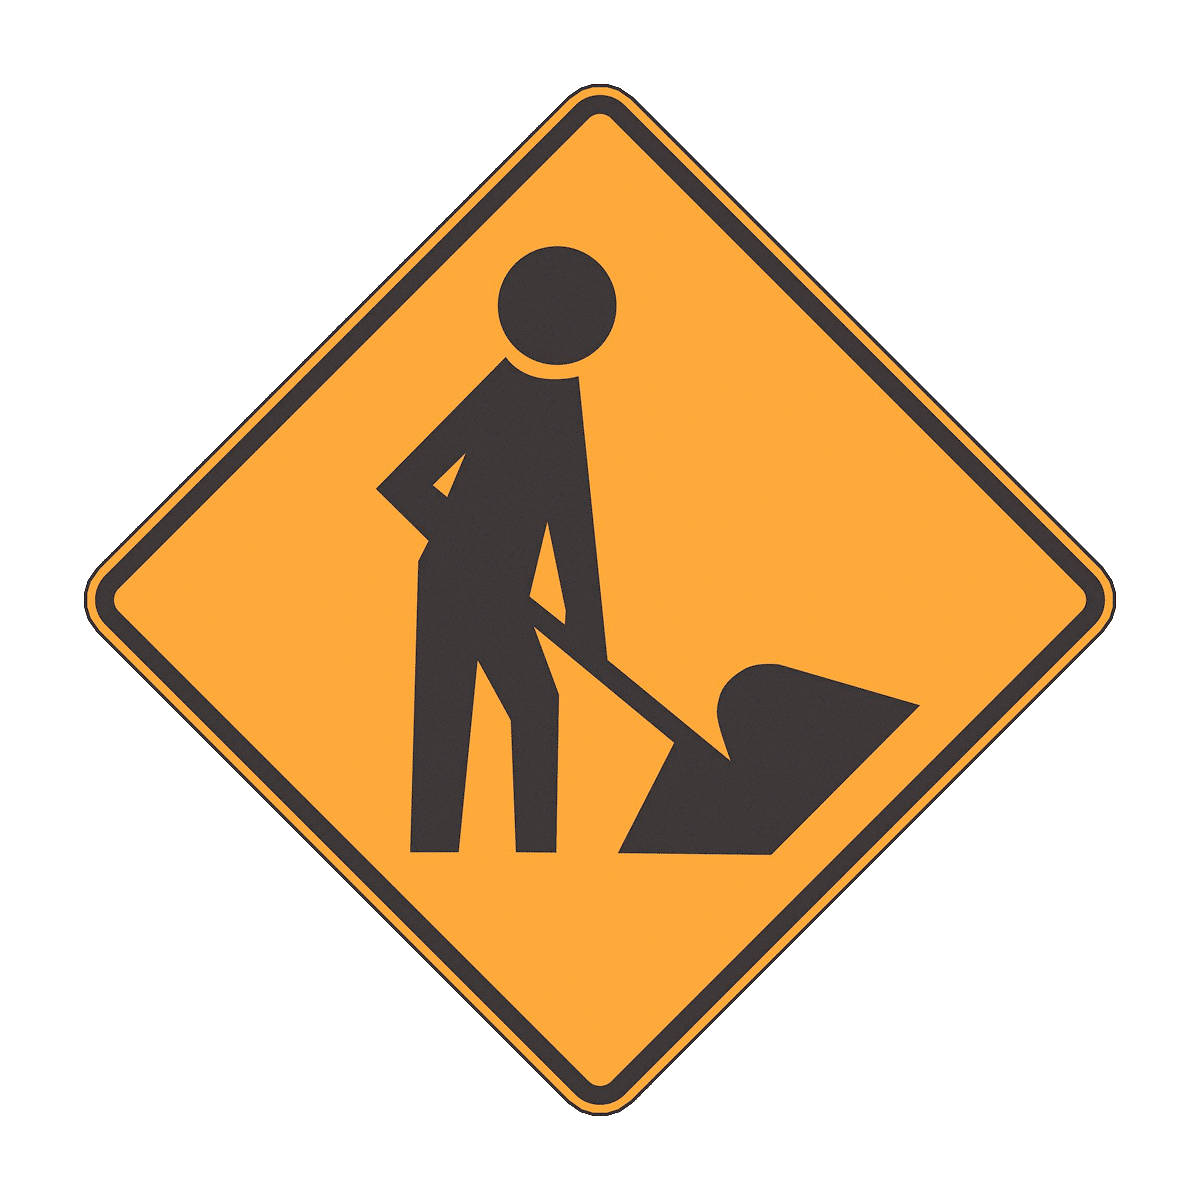 Road construction sign